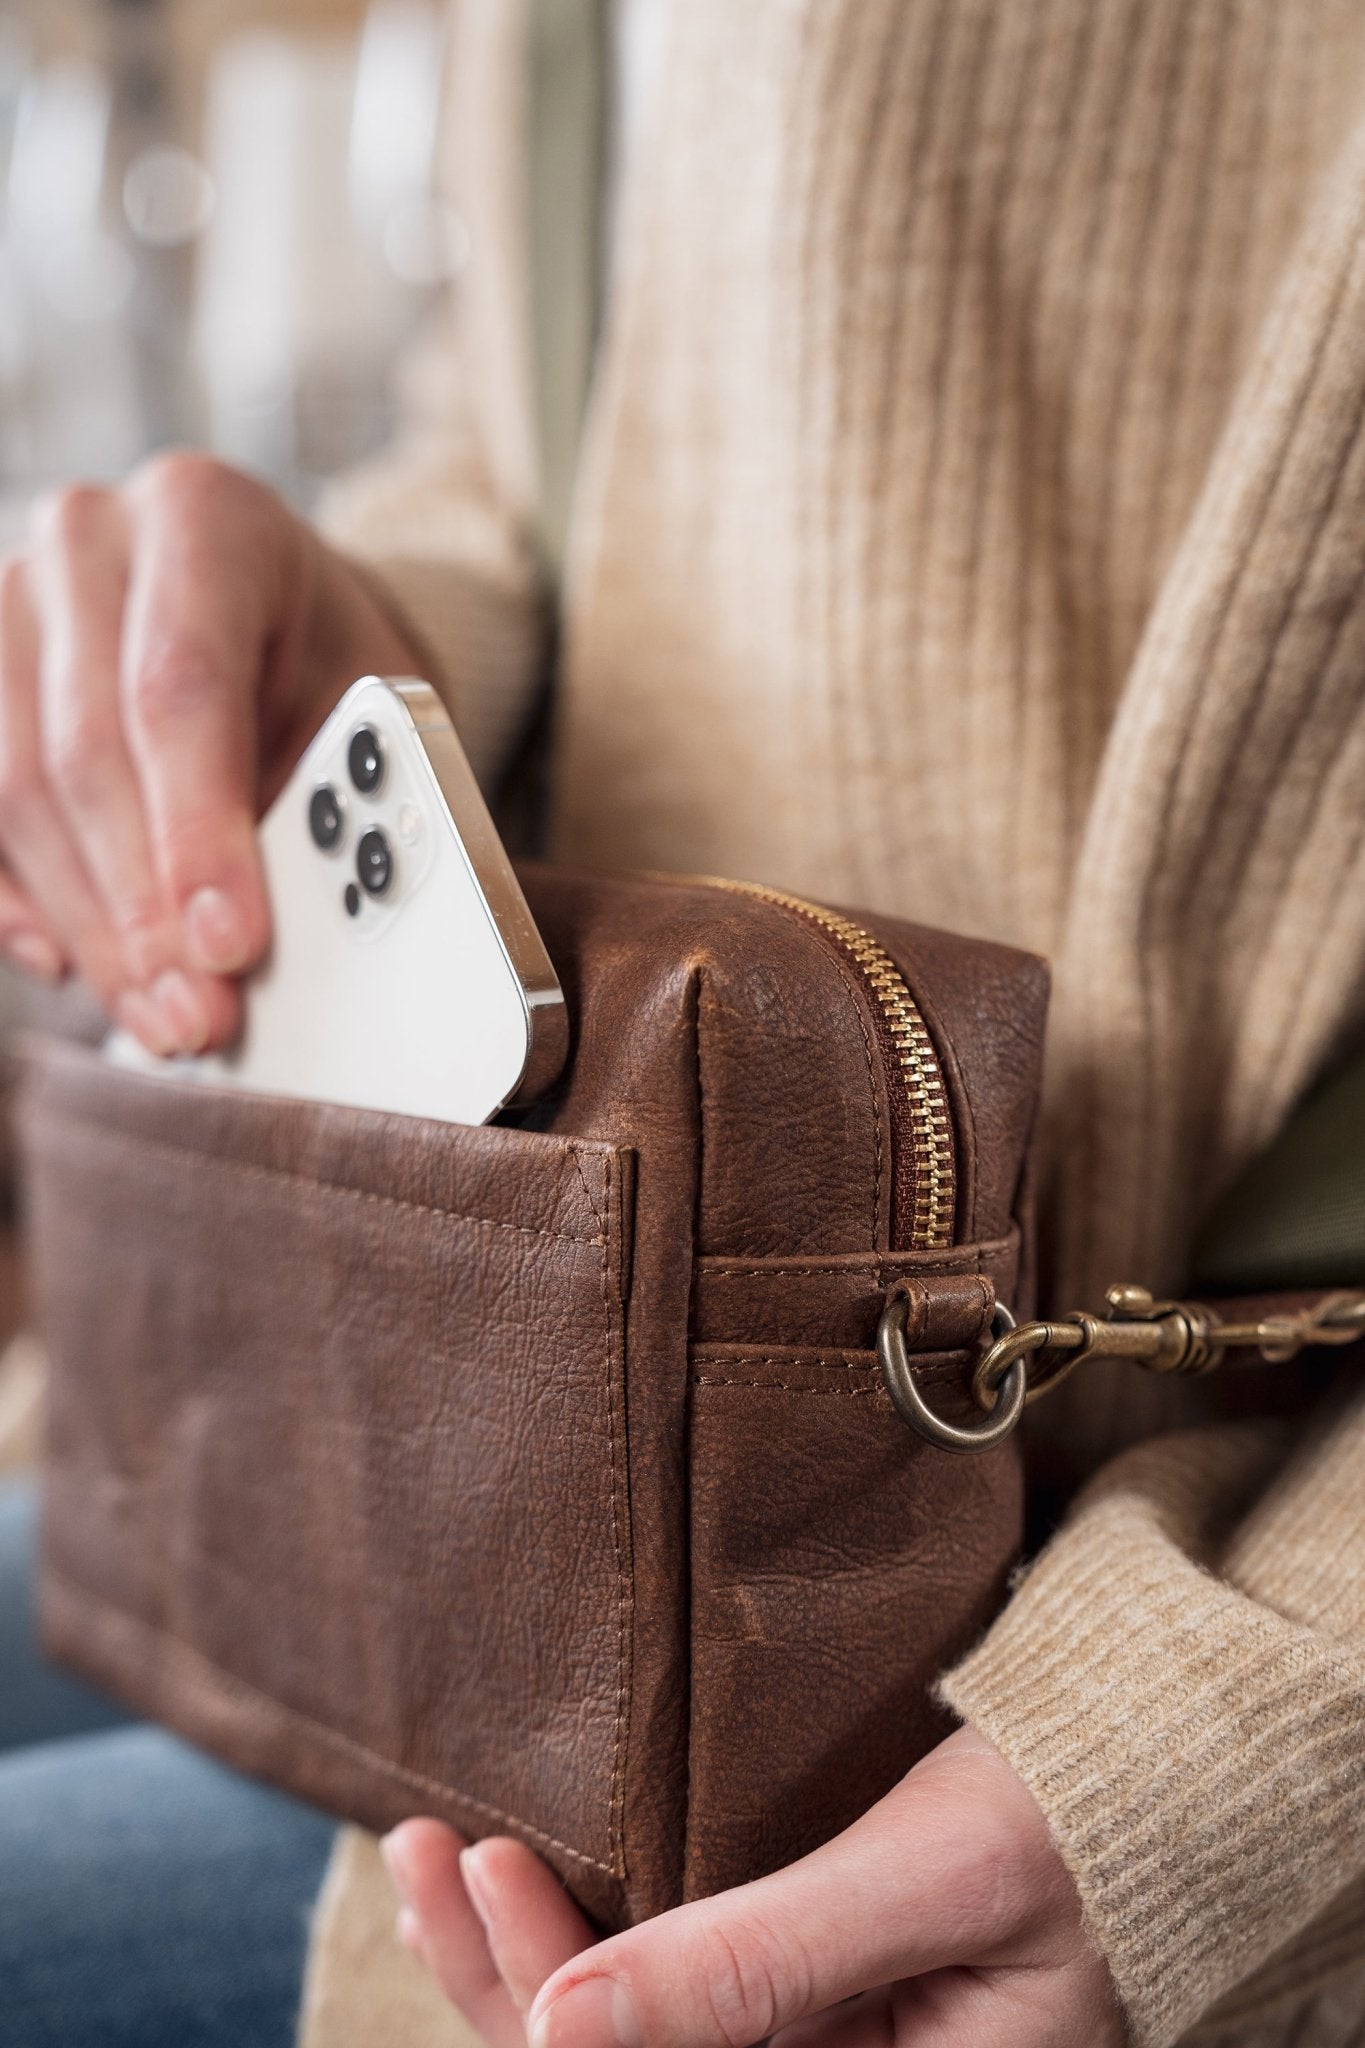 A woman is shown sitting holding a brown washable paper cross body bag with an external pocket. She is sliding an iPhone into the external pocket of the bag.